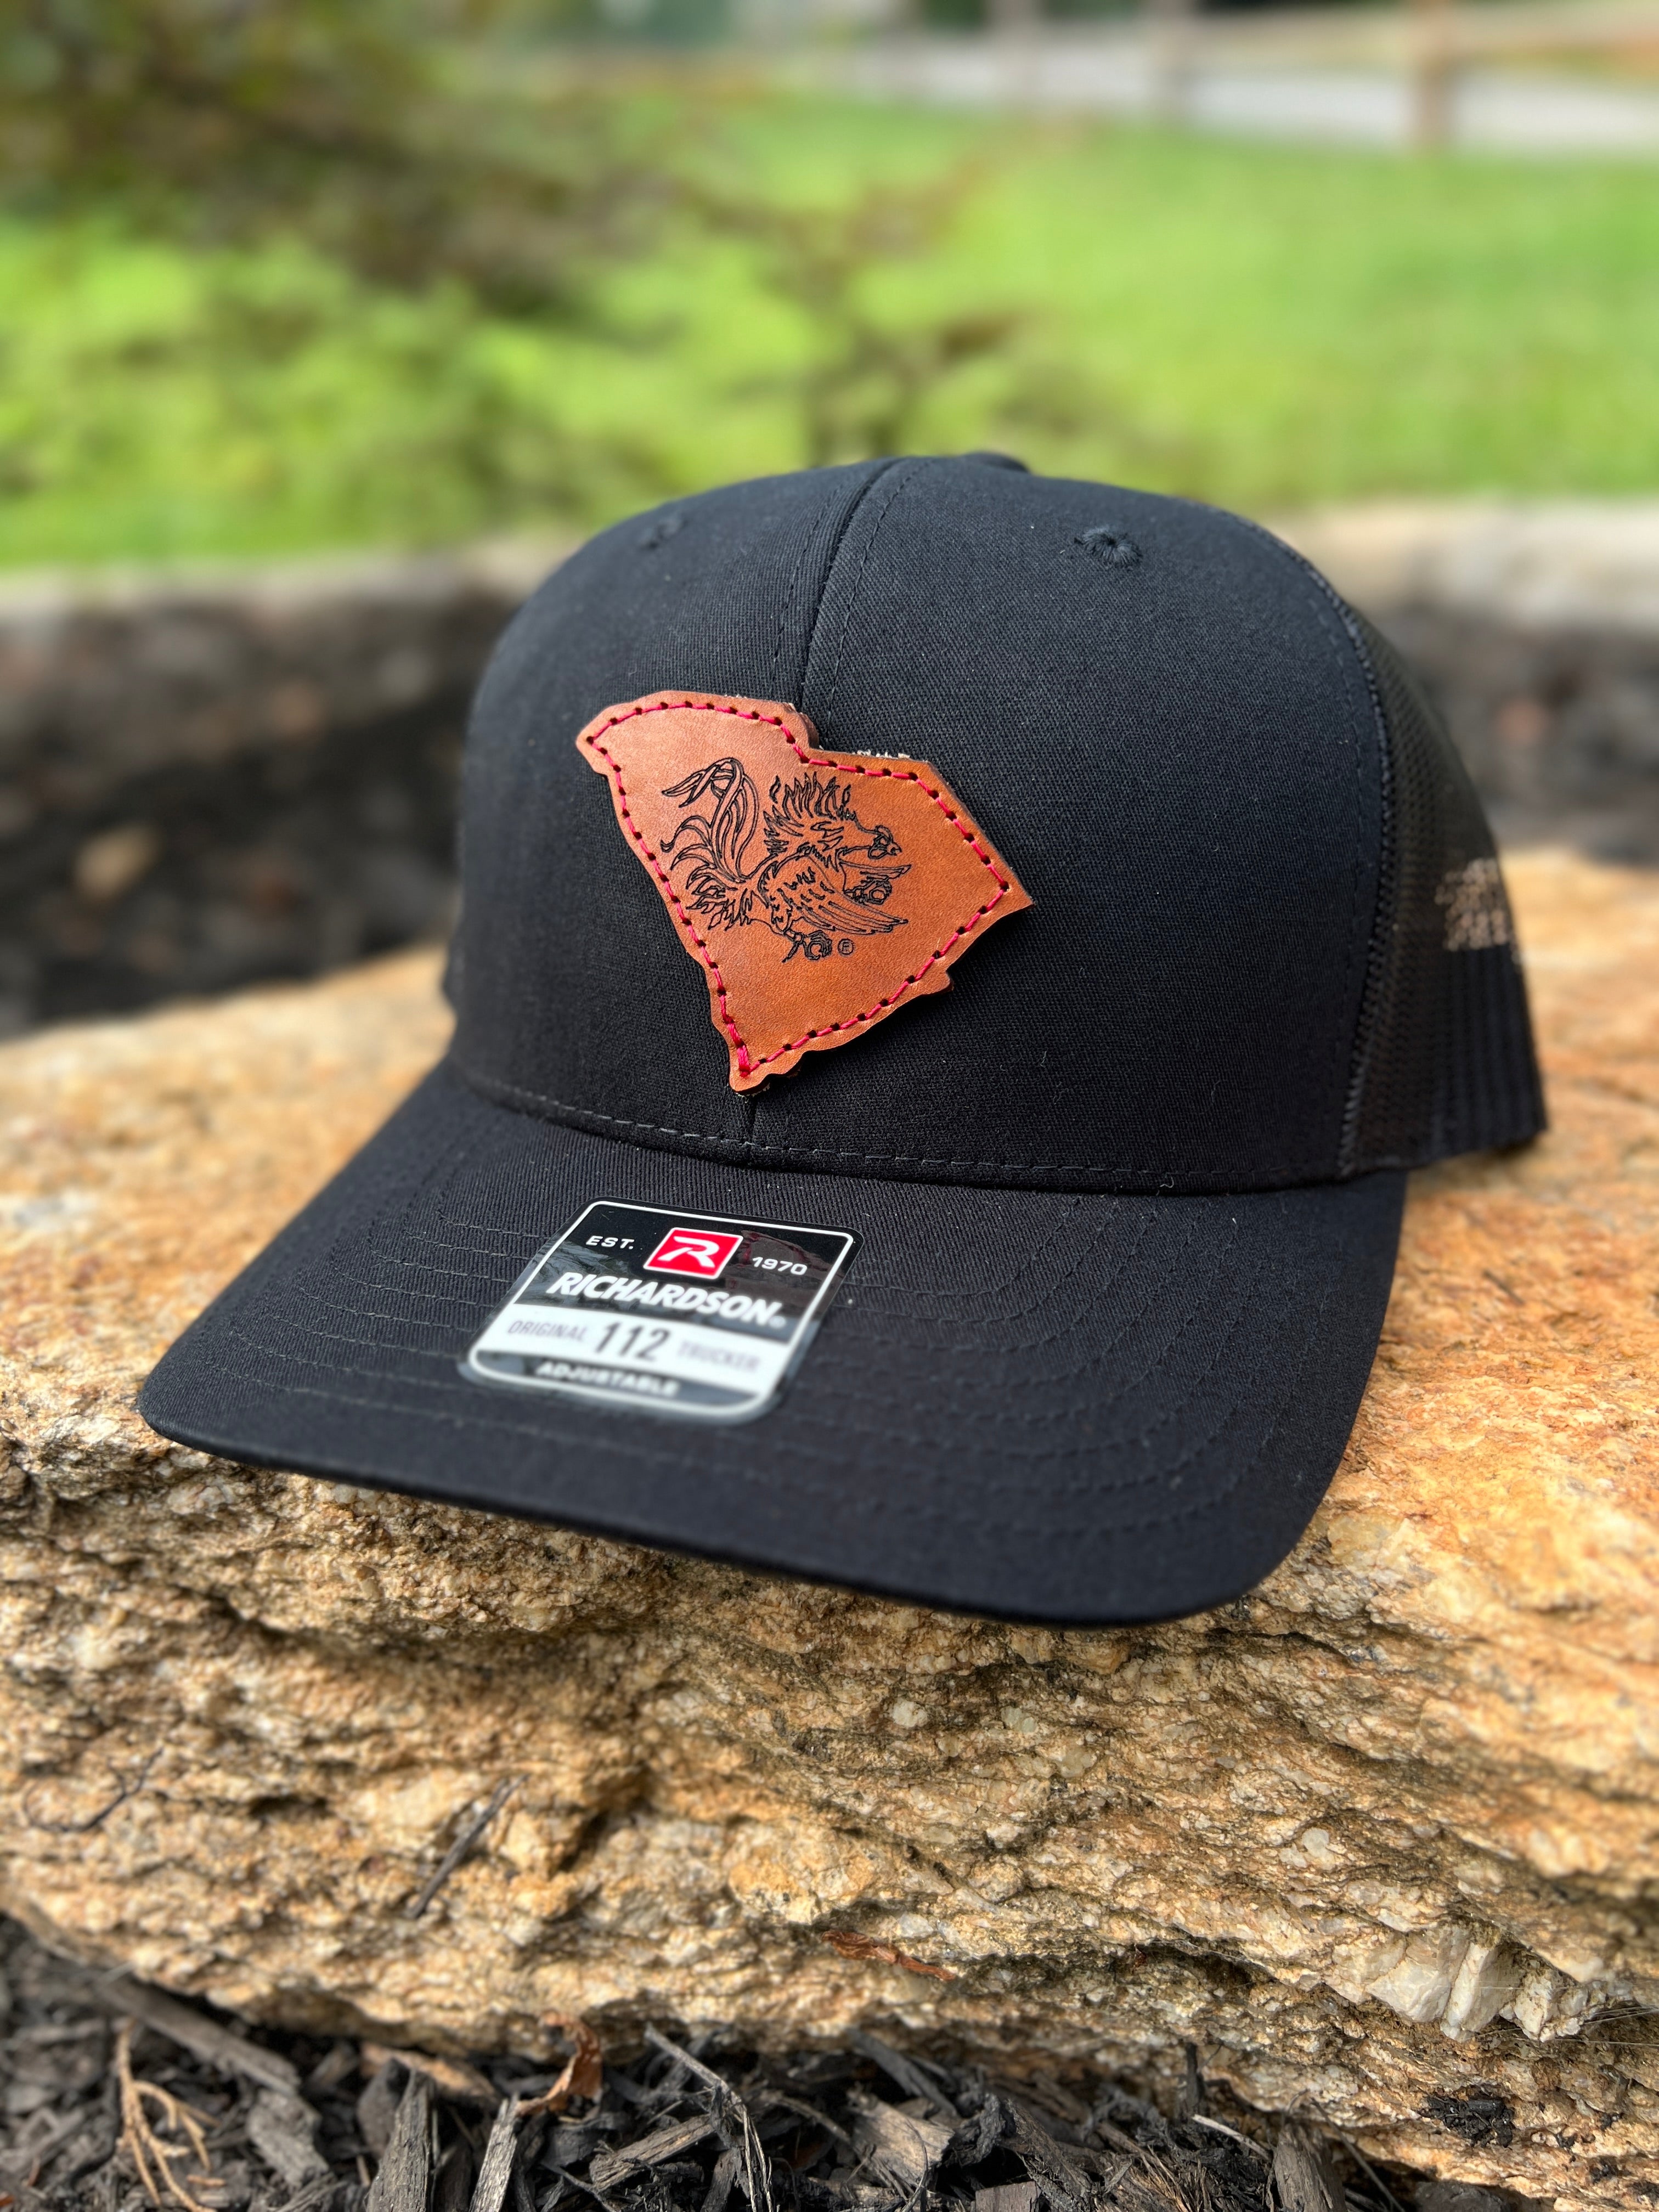 South Carolina Gamecocks Leather Patch Trucker Hat (State Gamecock)